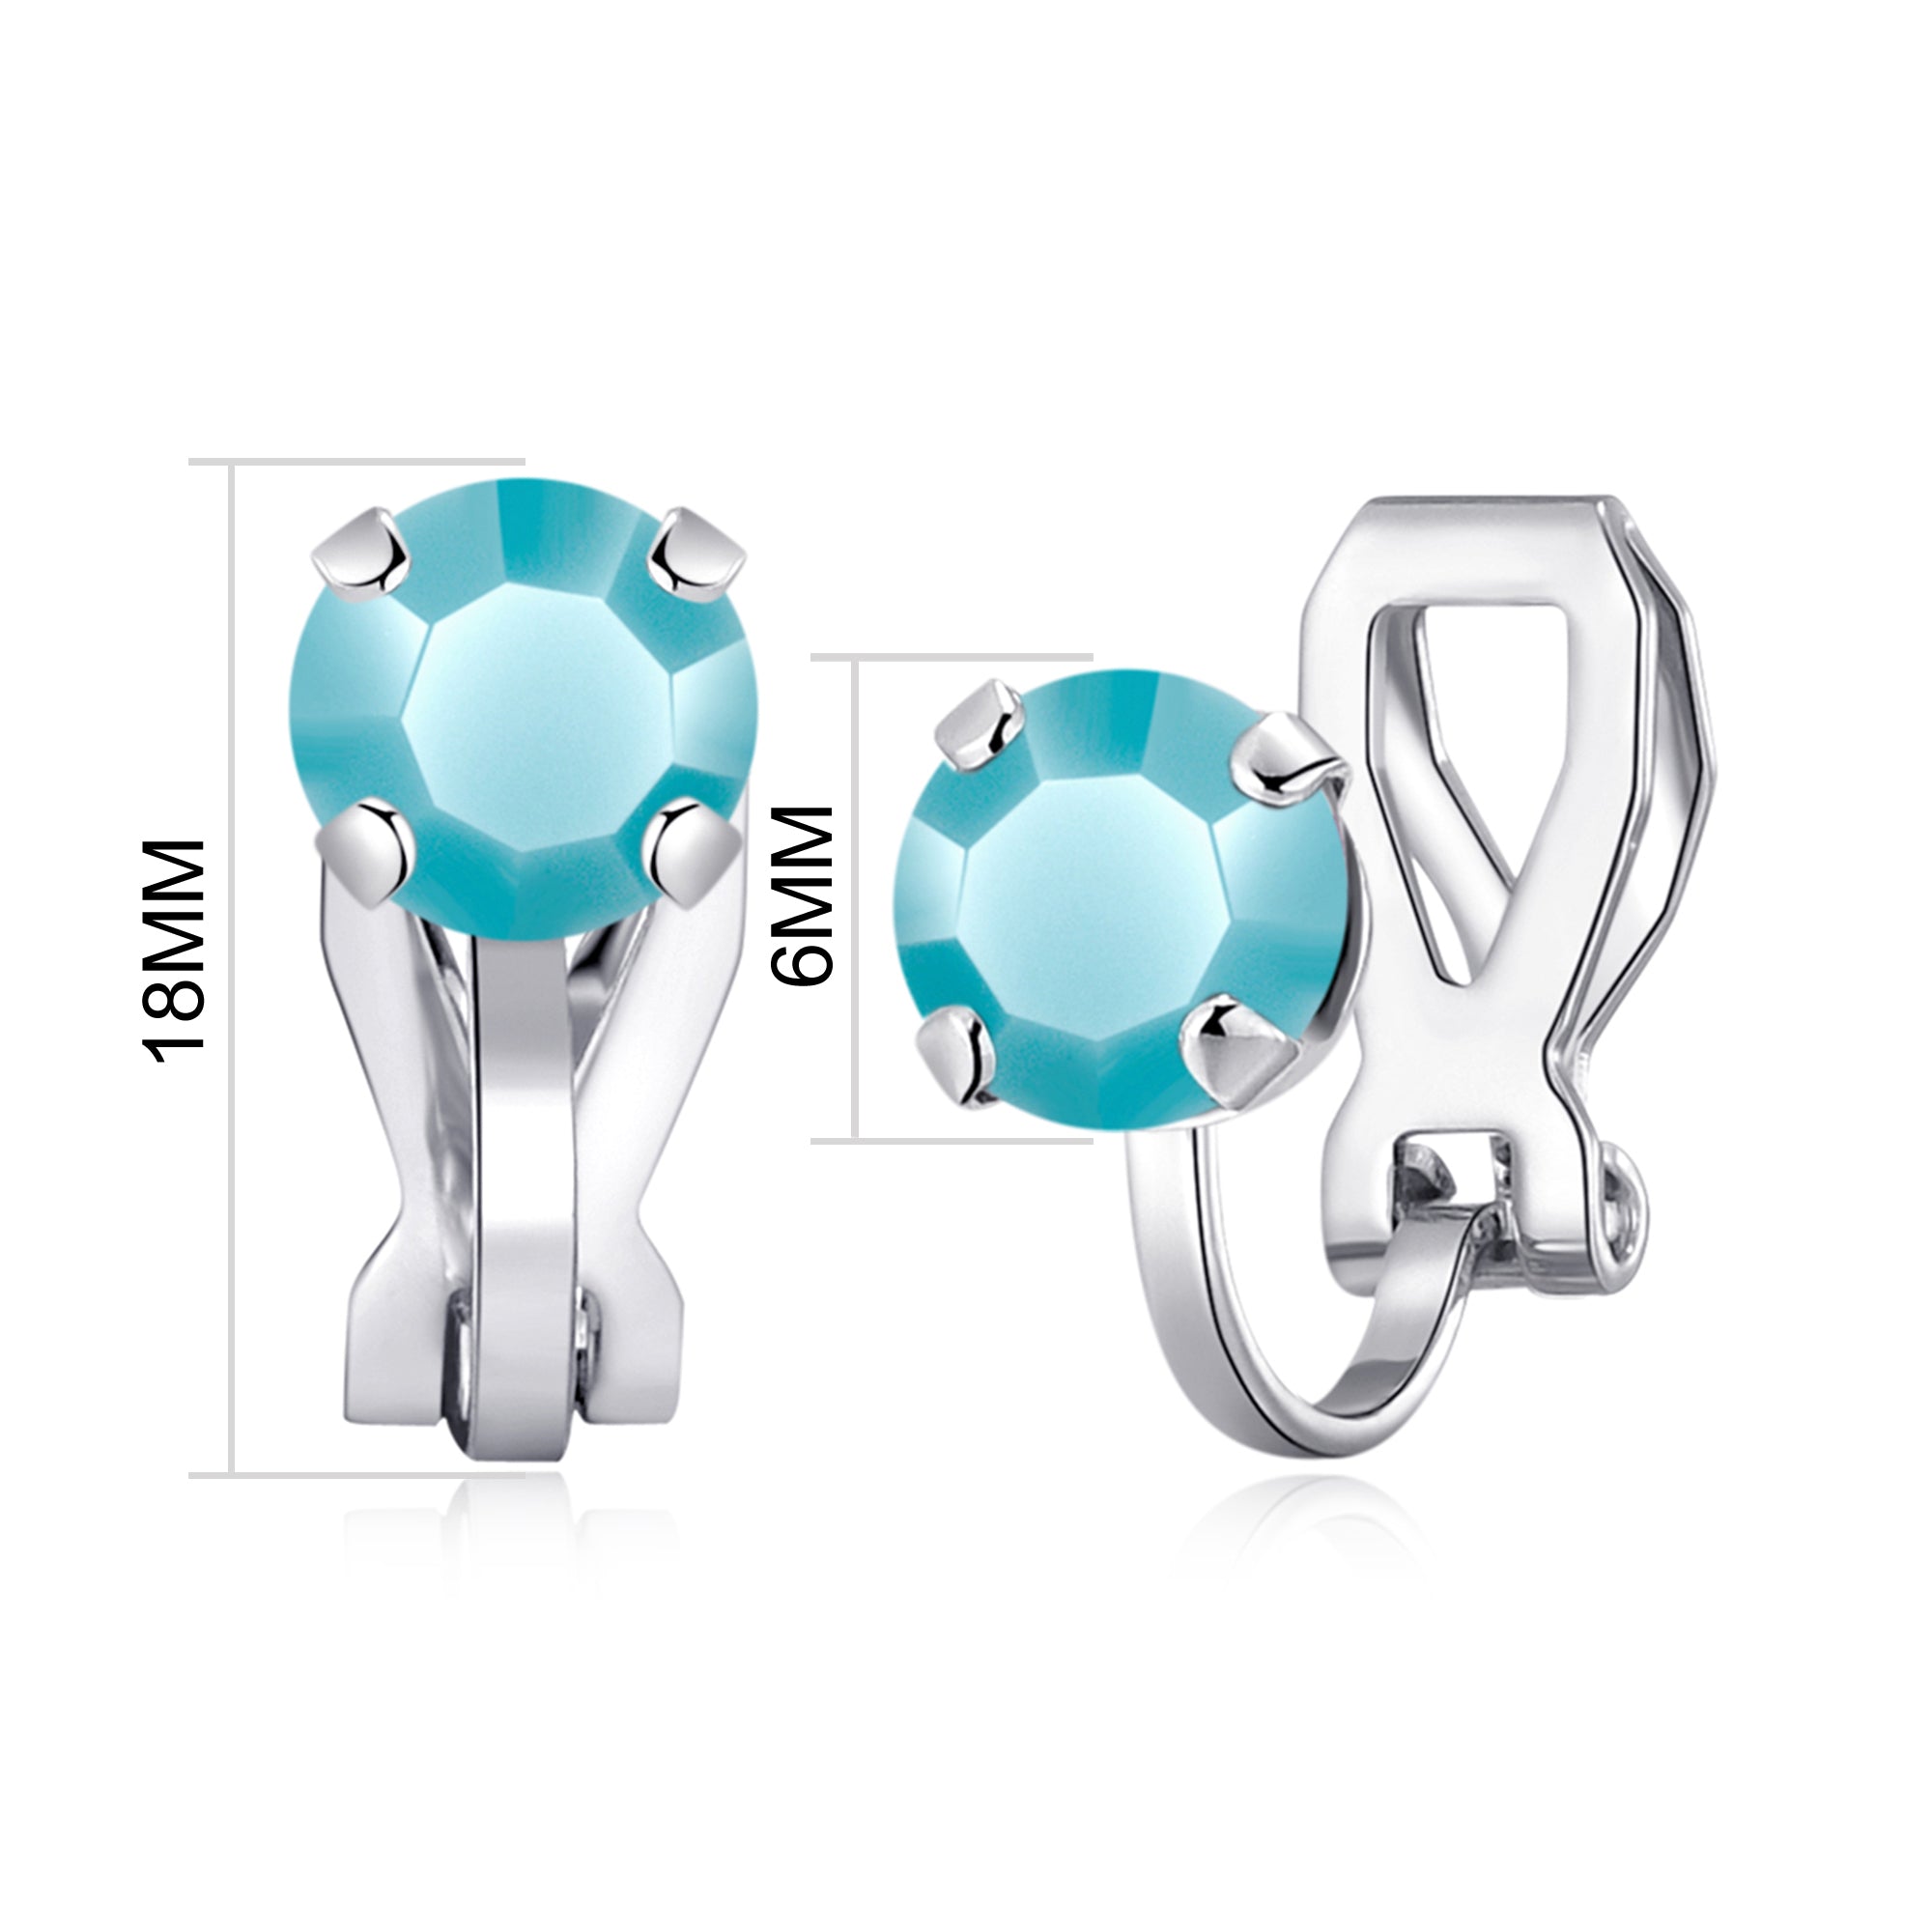 December (Turquoise) Birthstone Clip On Earrings Created with Zircondia® Crystals